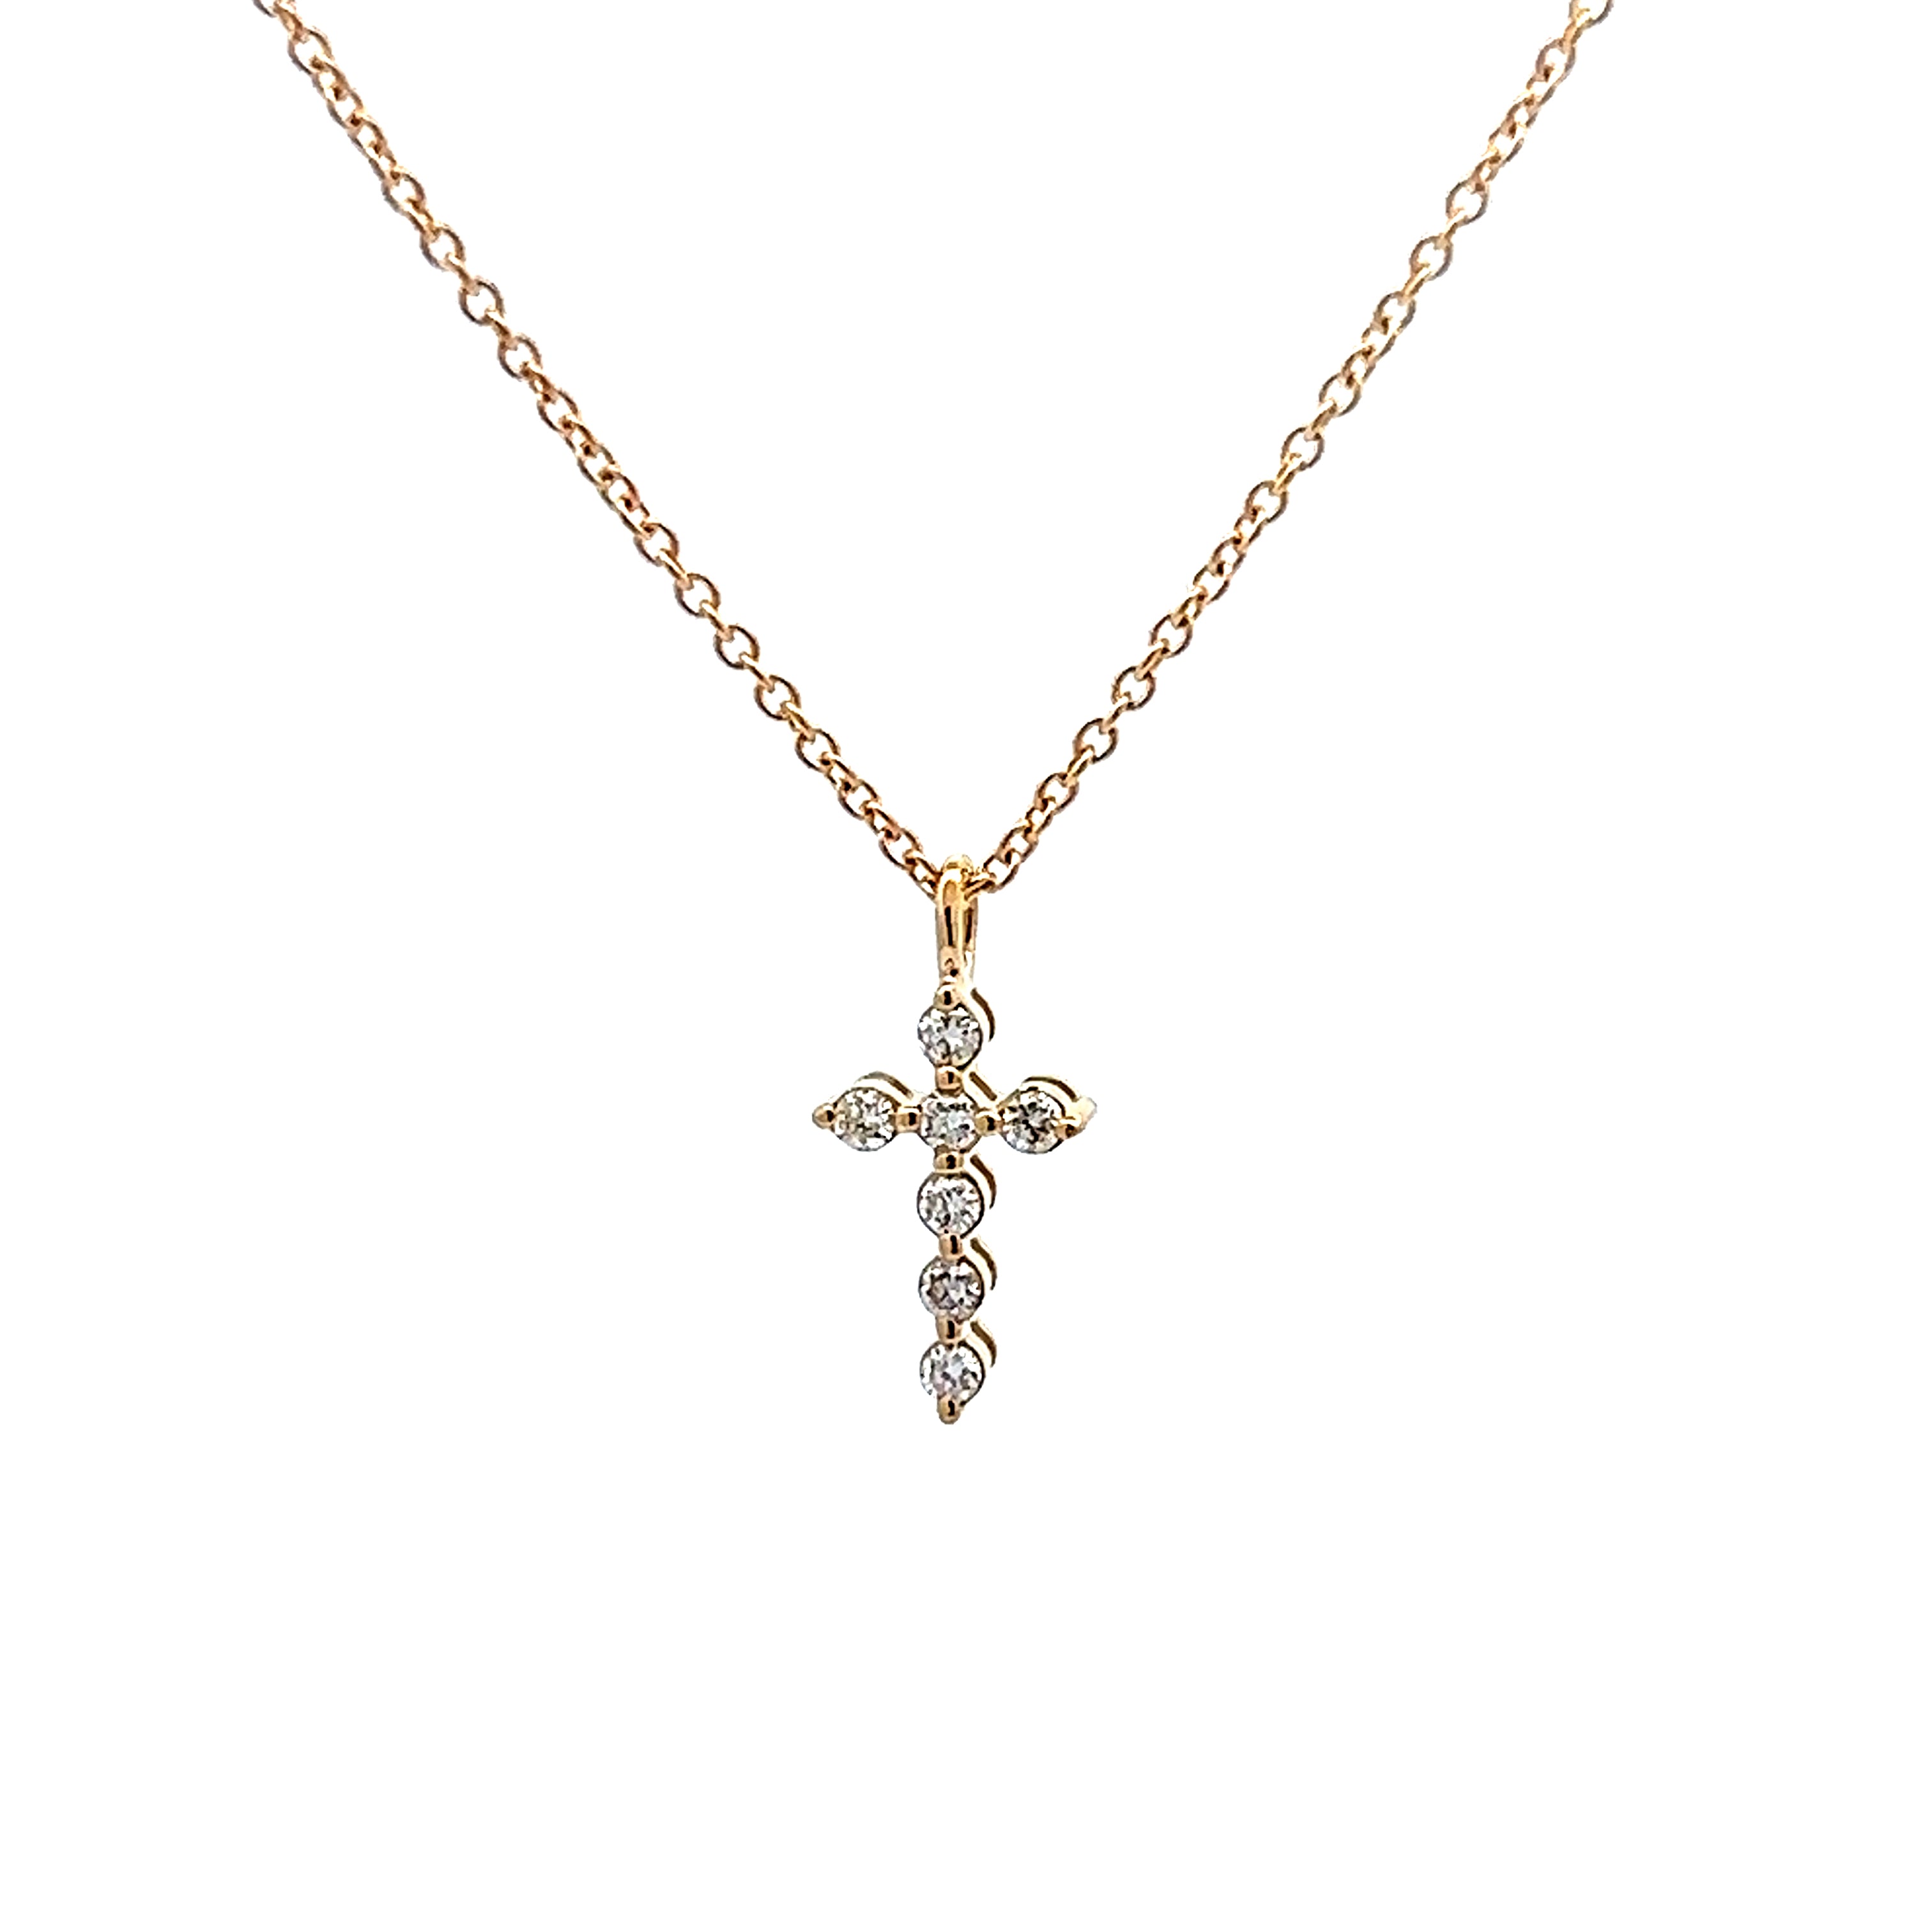 Cross Pendant With 1/2 Carat TW of Diamonds in 10kt Yellow Gold